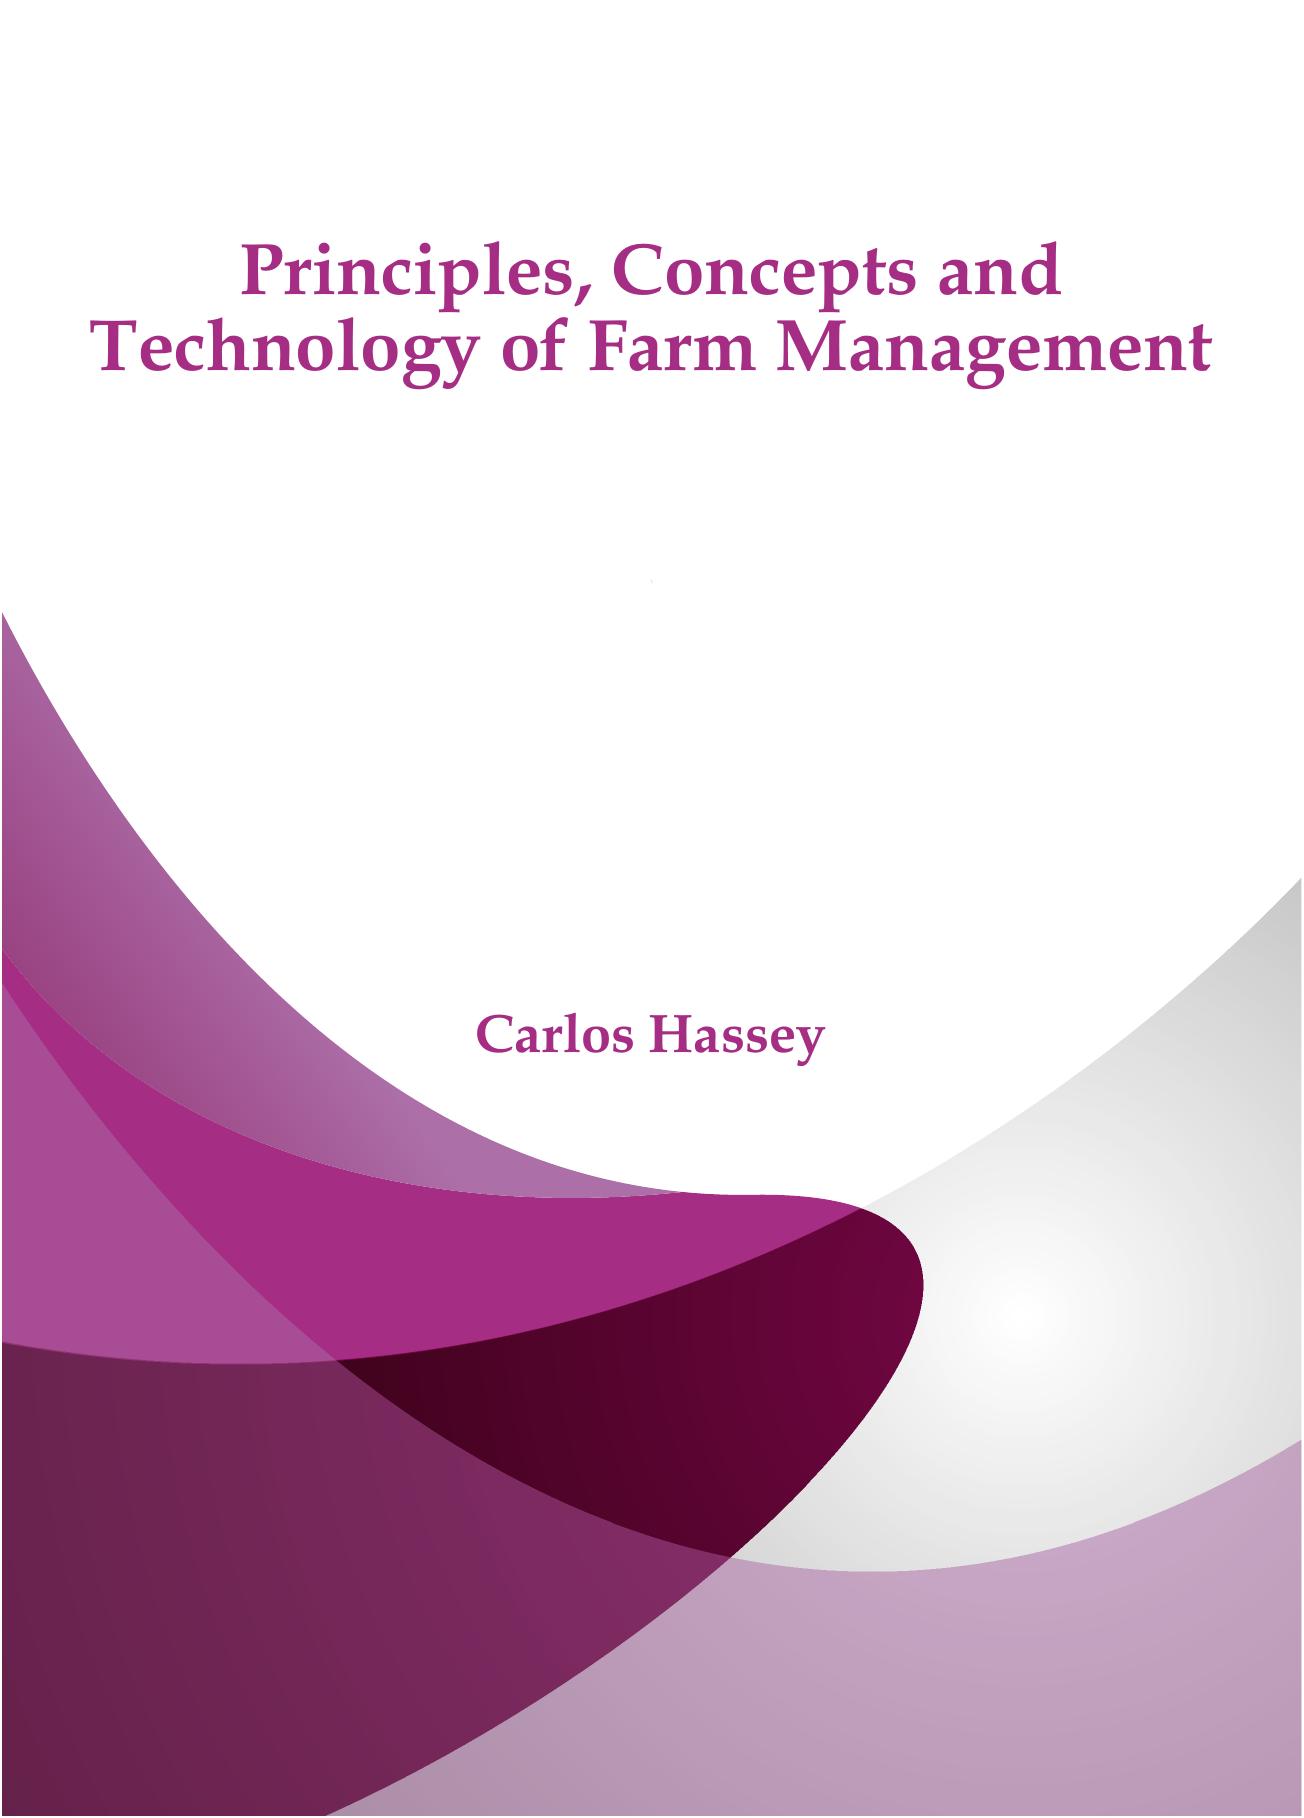 Principles, Concepts and Technology of Farm Management 2017